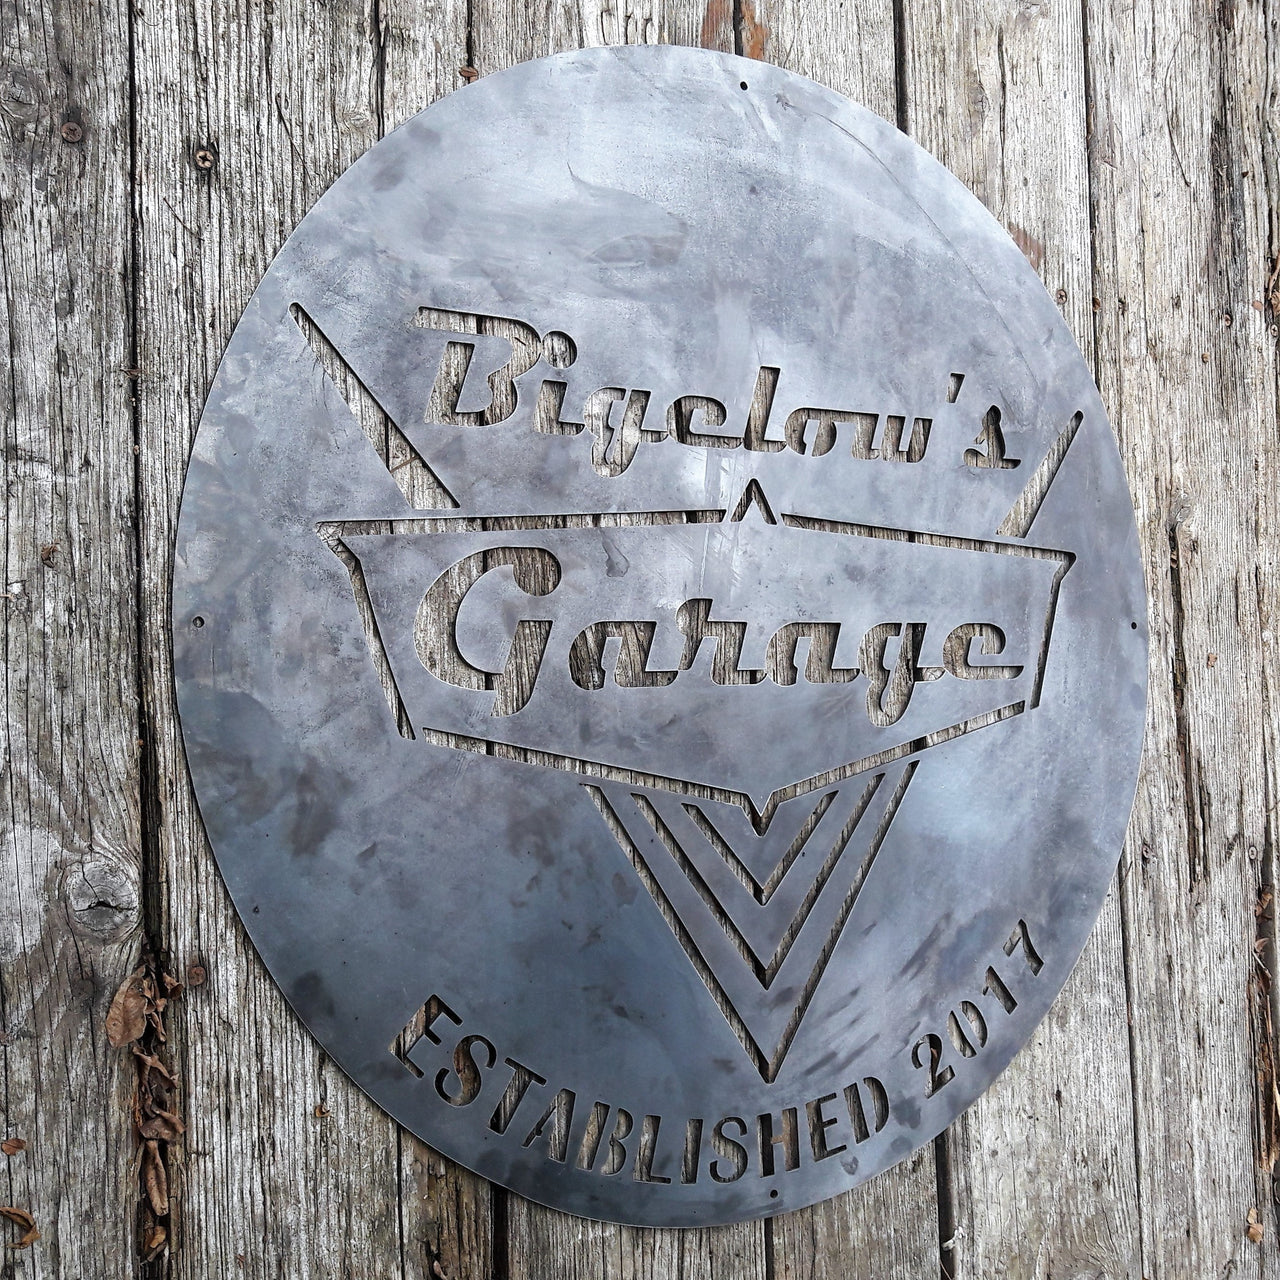 This is a rustic round metal garage sign which reads, "Bigelow's Garage, Established 2017"